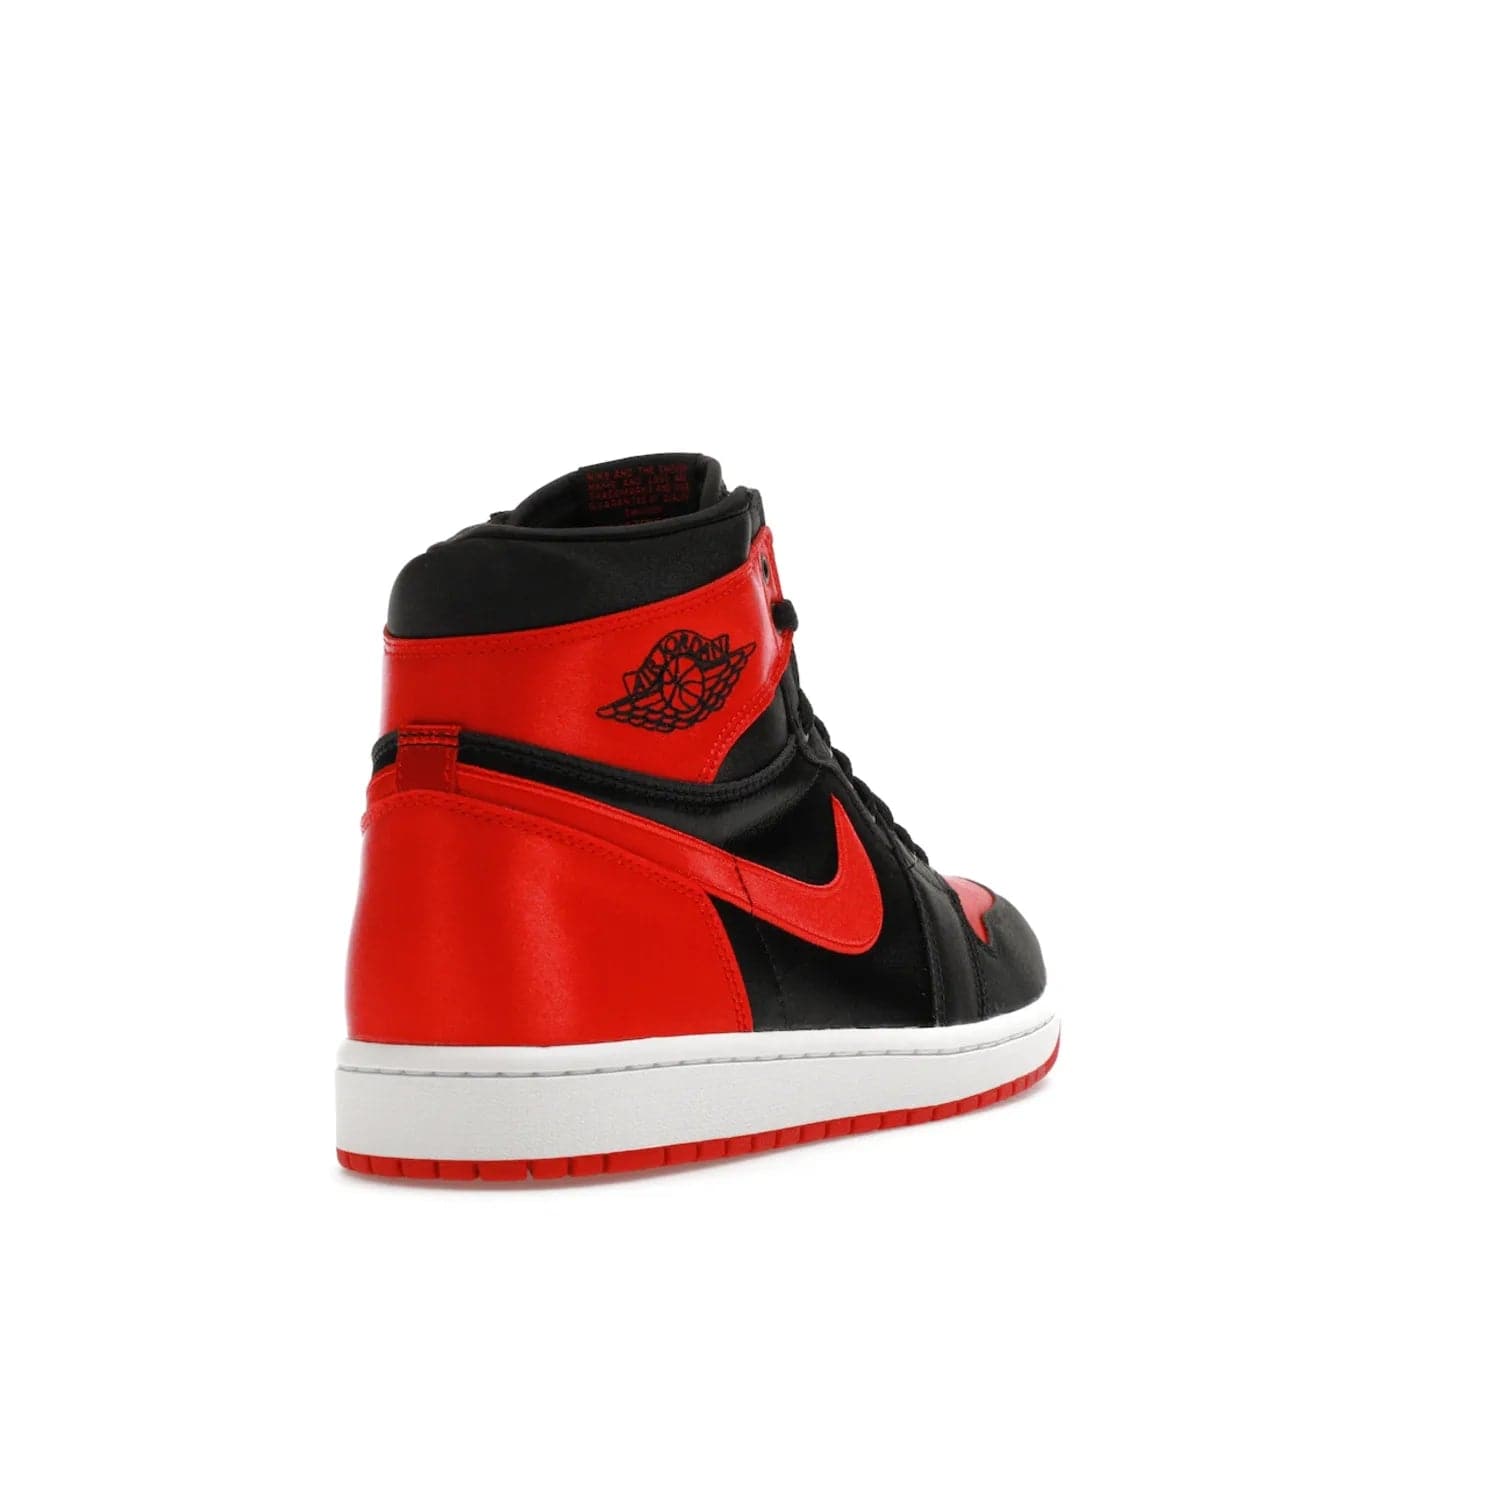 Jordan 1 Retro High OG Satin Bred (Women's) - Image 31 - Only at www.BallersClubKickz.com - Introducing the Jordan 1 Retro High OG Satin Bred (Women's). Luxe satin finish, contrasting hues & classic accents. Trending sneakers symbolizing timelessness & heritage. Make a bold statement with this iconic shoe. Available October 4, 2023.